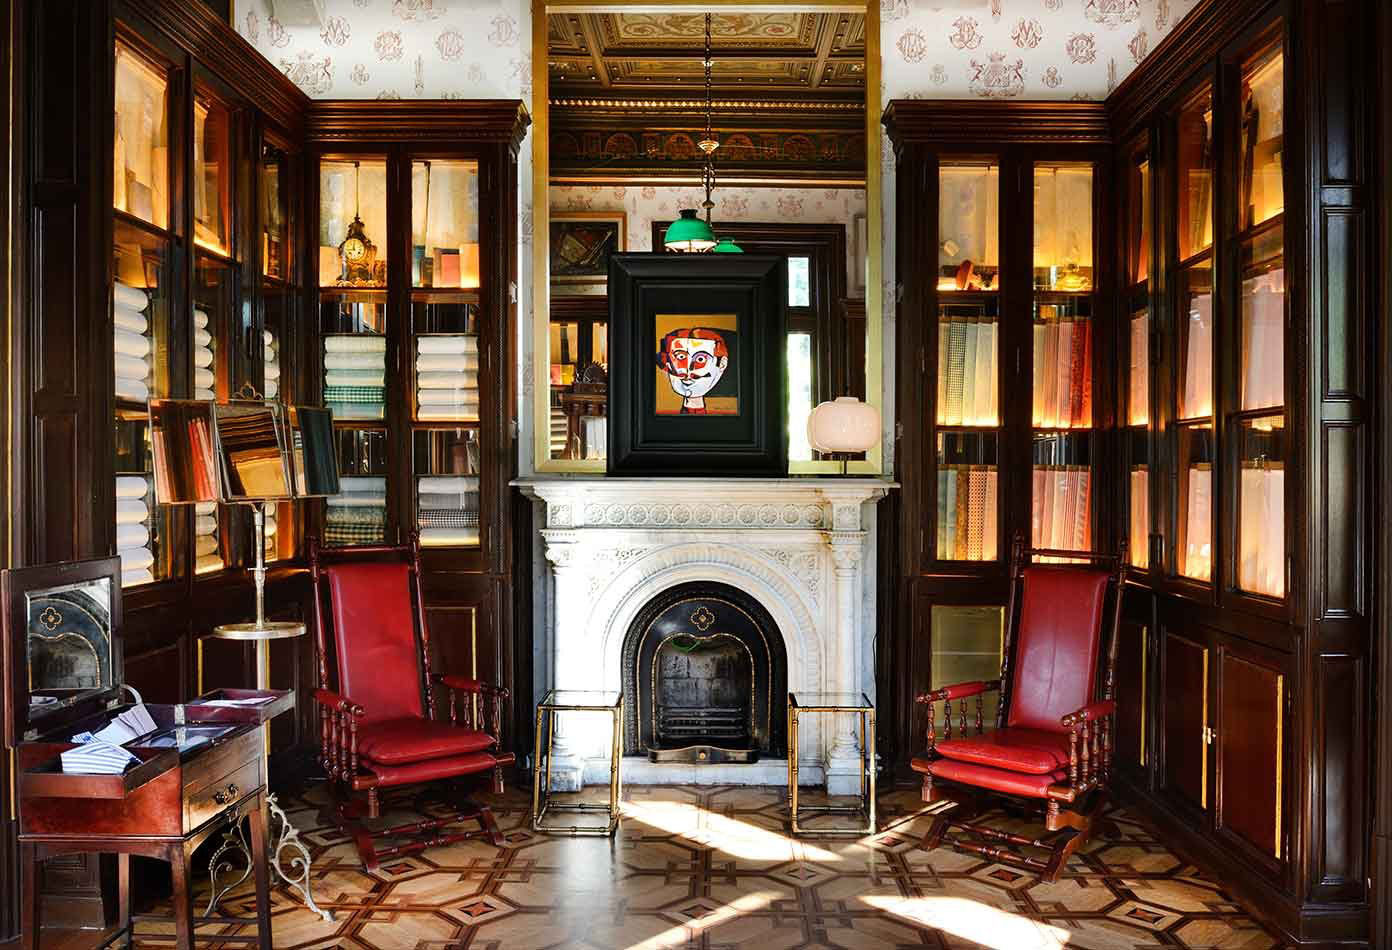 glass front bookcase lined room with marble fireplace, two red leather chairs, picasso-like pic on mantel